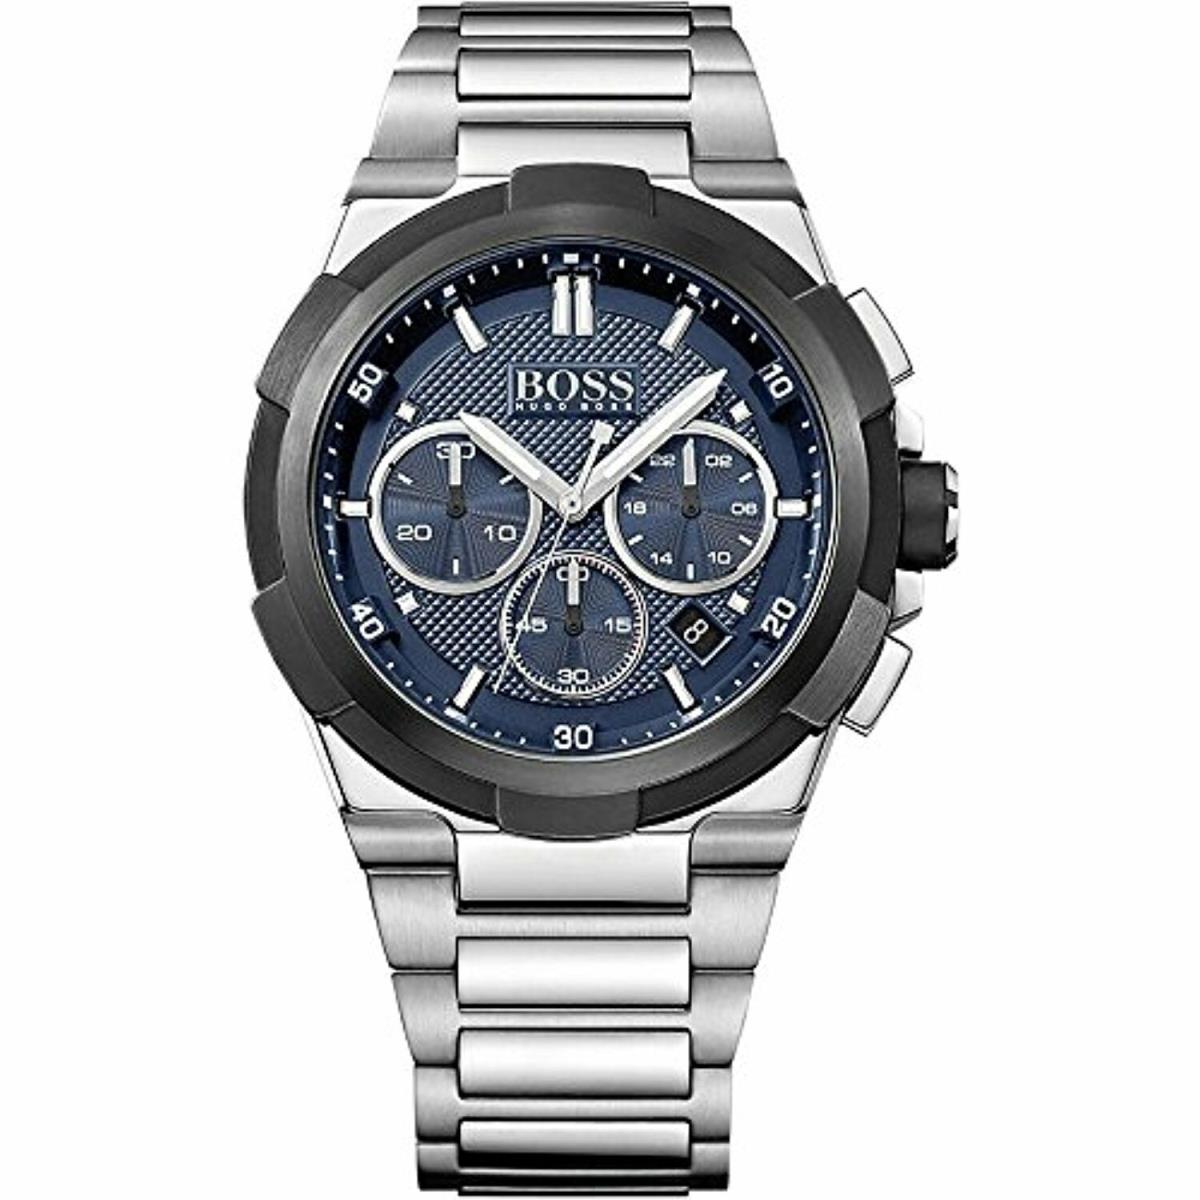 Hugo Boss Supernova Blue Dial Stainless Steel Chronograph Men s Watch 1513360 - Dial: Blue, Band: Silver